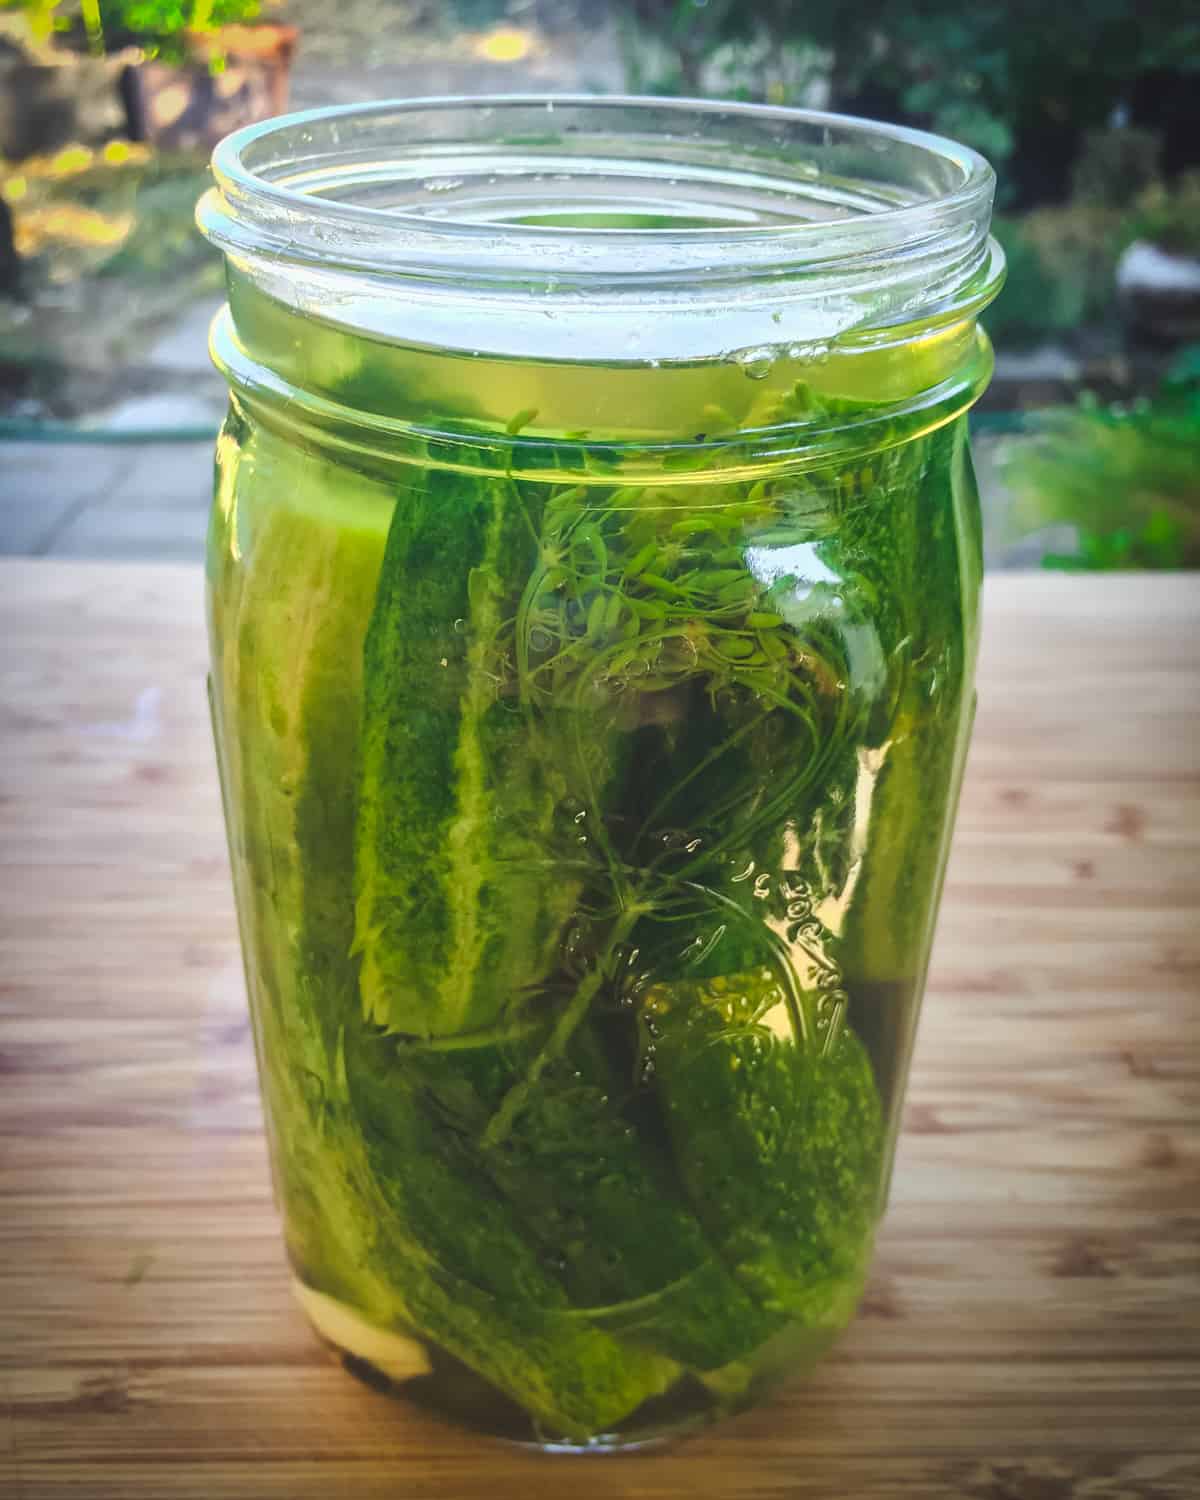 a quart jar of cucumber spears to make quick pickles